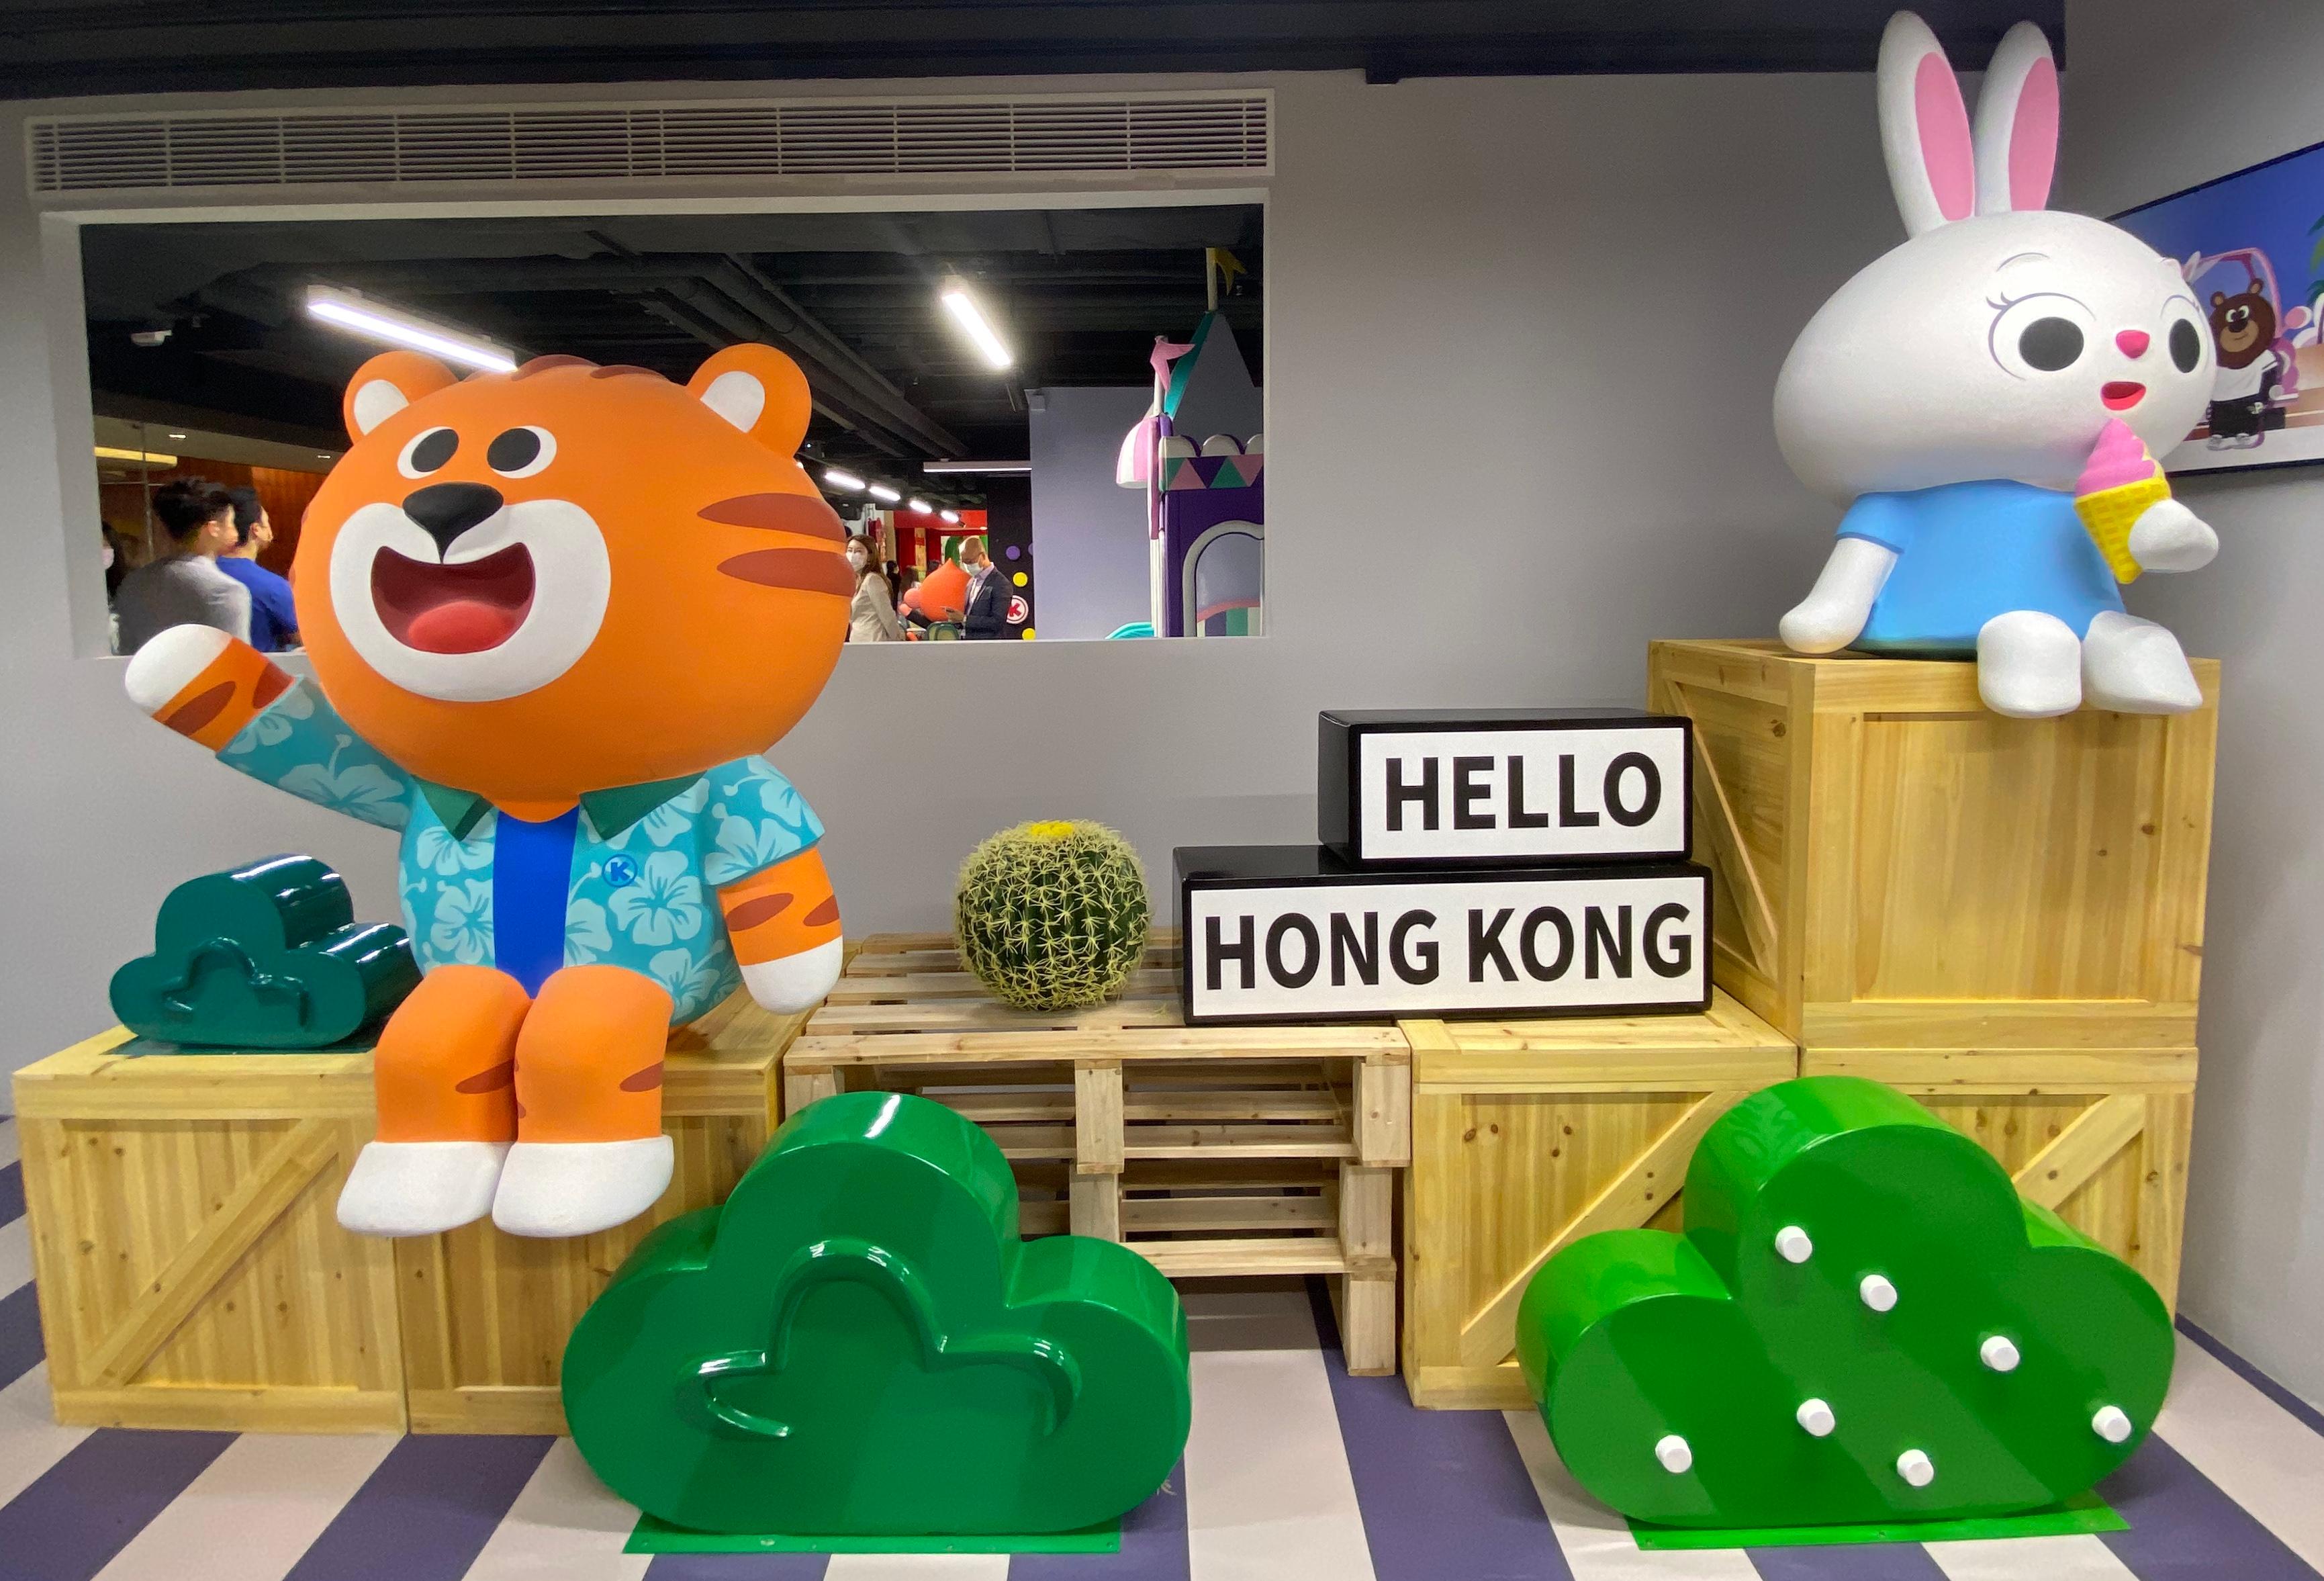 Singapore's mega indoor theme park operator Kiztopia officially opened its first overseas outlet in Hong Kong today (September 30). It features 15 play experience areas, including two-storey-high slides, huge ball pits, creative role play rooms, multiple challenging obstacle courses, trampolines and more, to provide a fun and wholesome family bonding experience to families and kids.